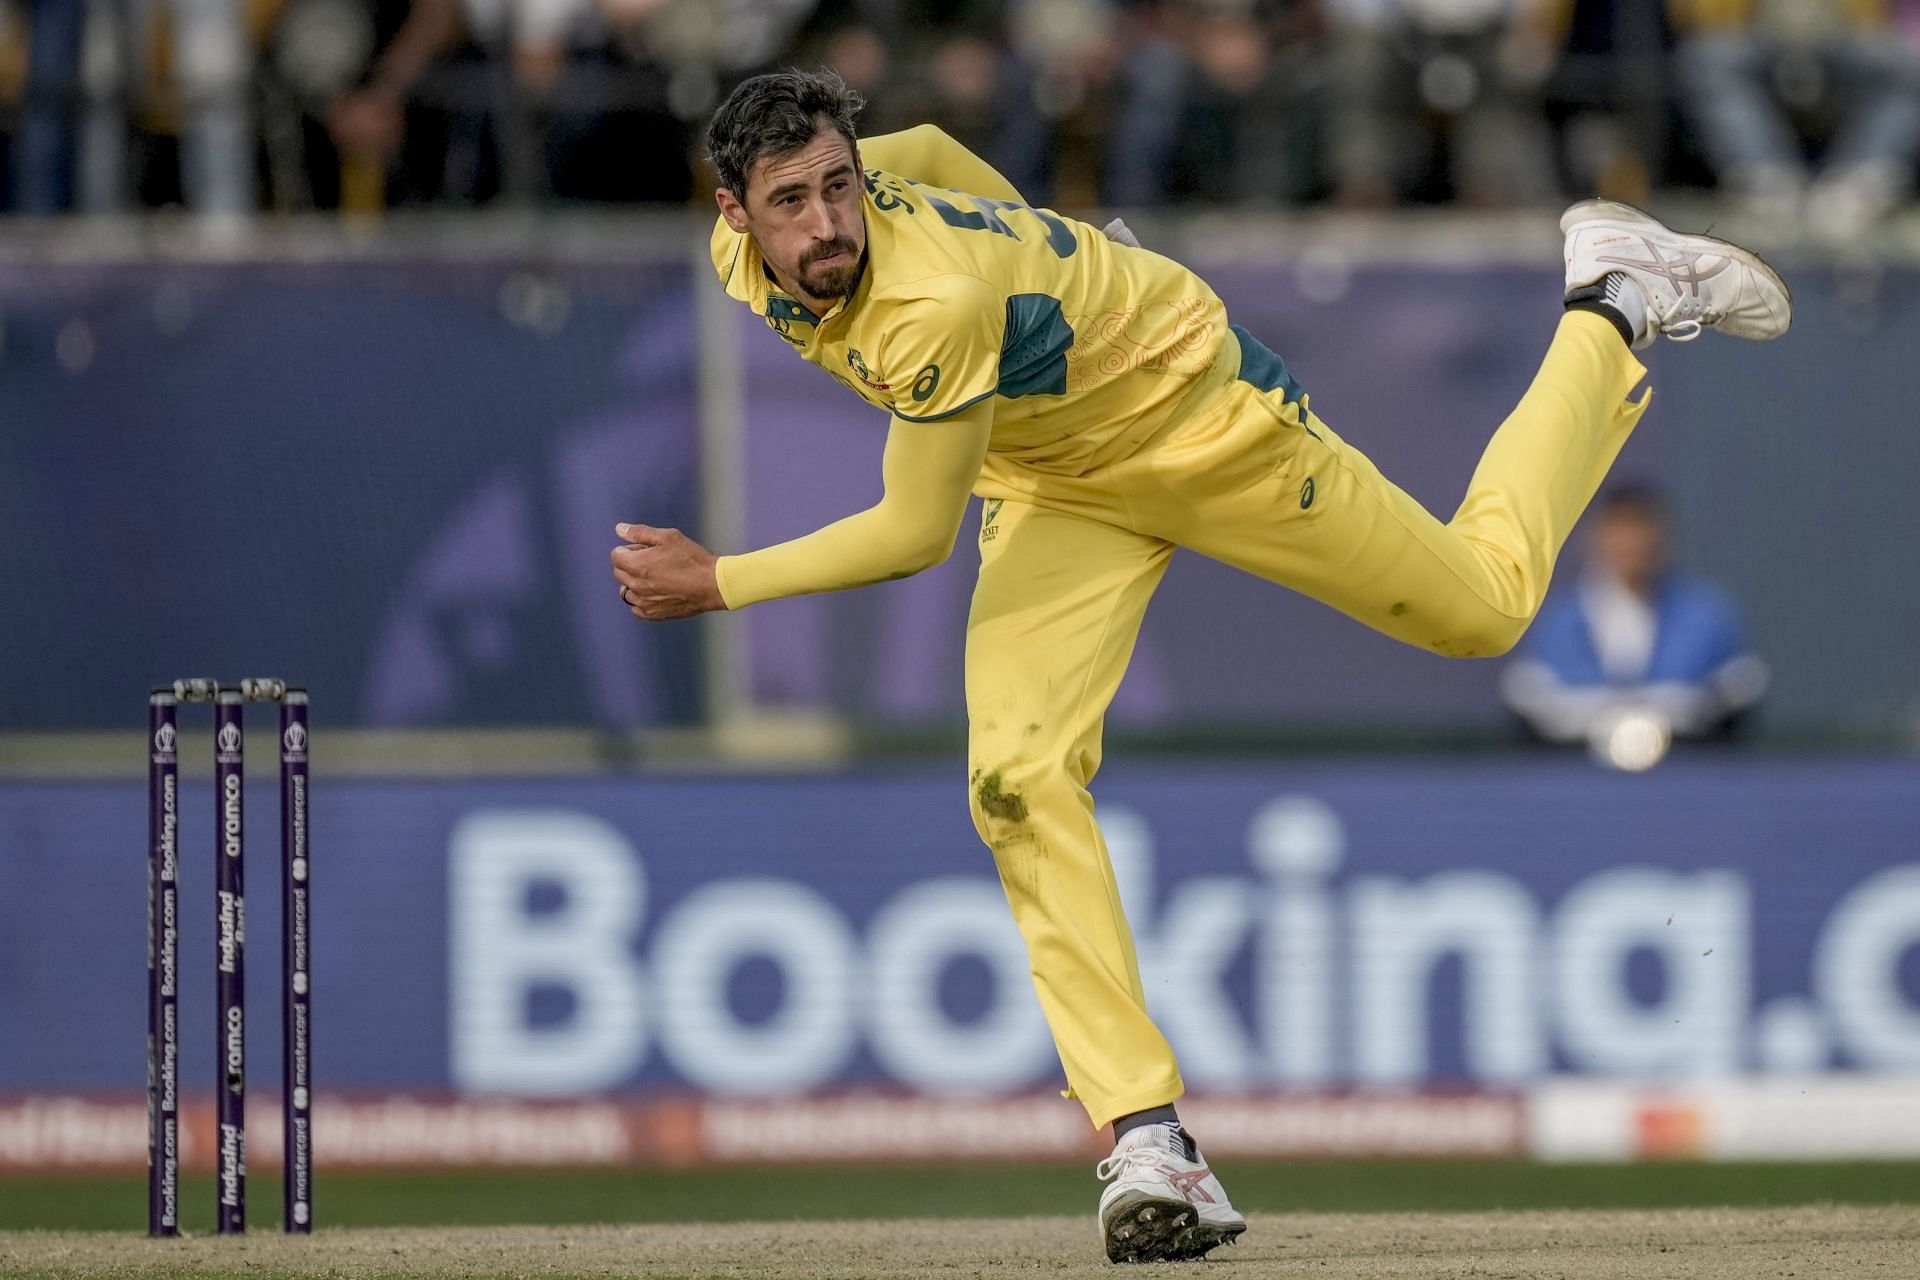 Mitchell Starc was signed by KKR for IPL 2018 but opted out due to injury.